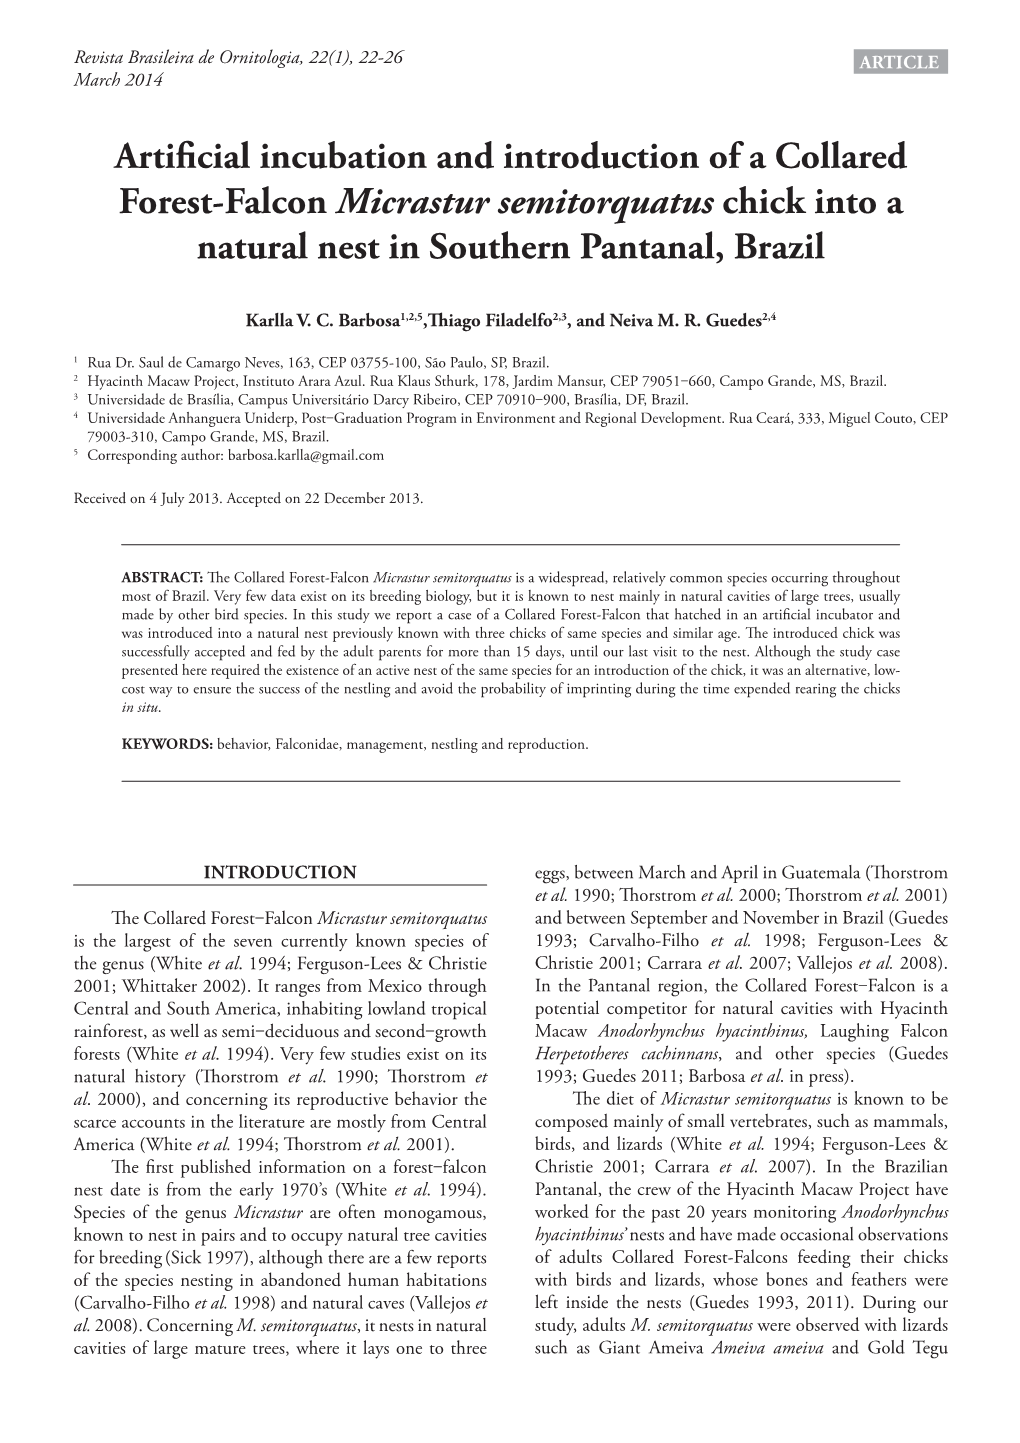 Artificial Incubation and Introduction of a Collared Forest-Falcon Micrastur